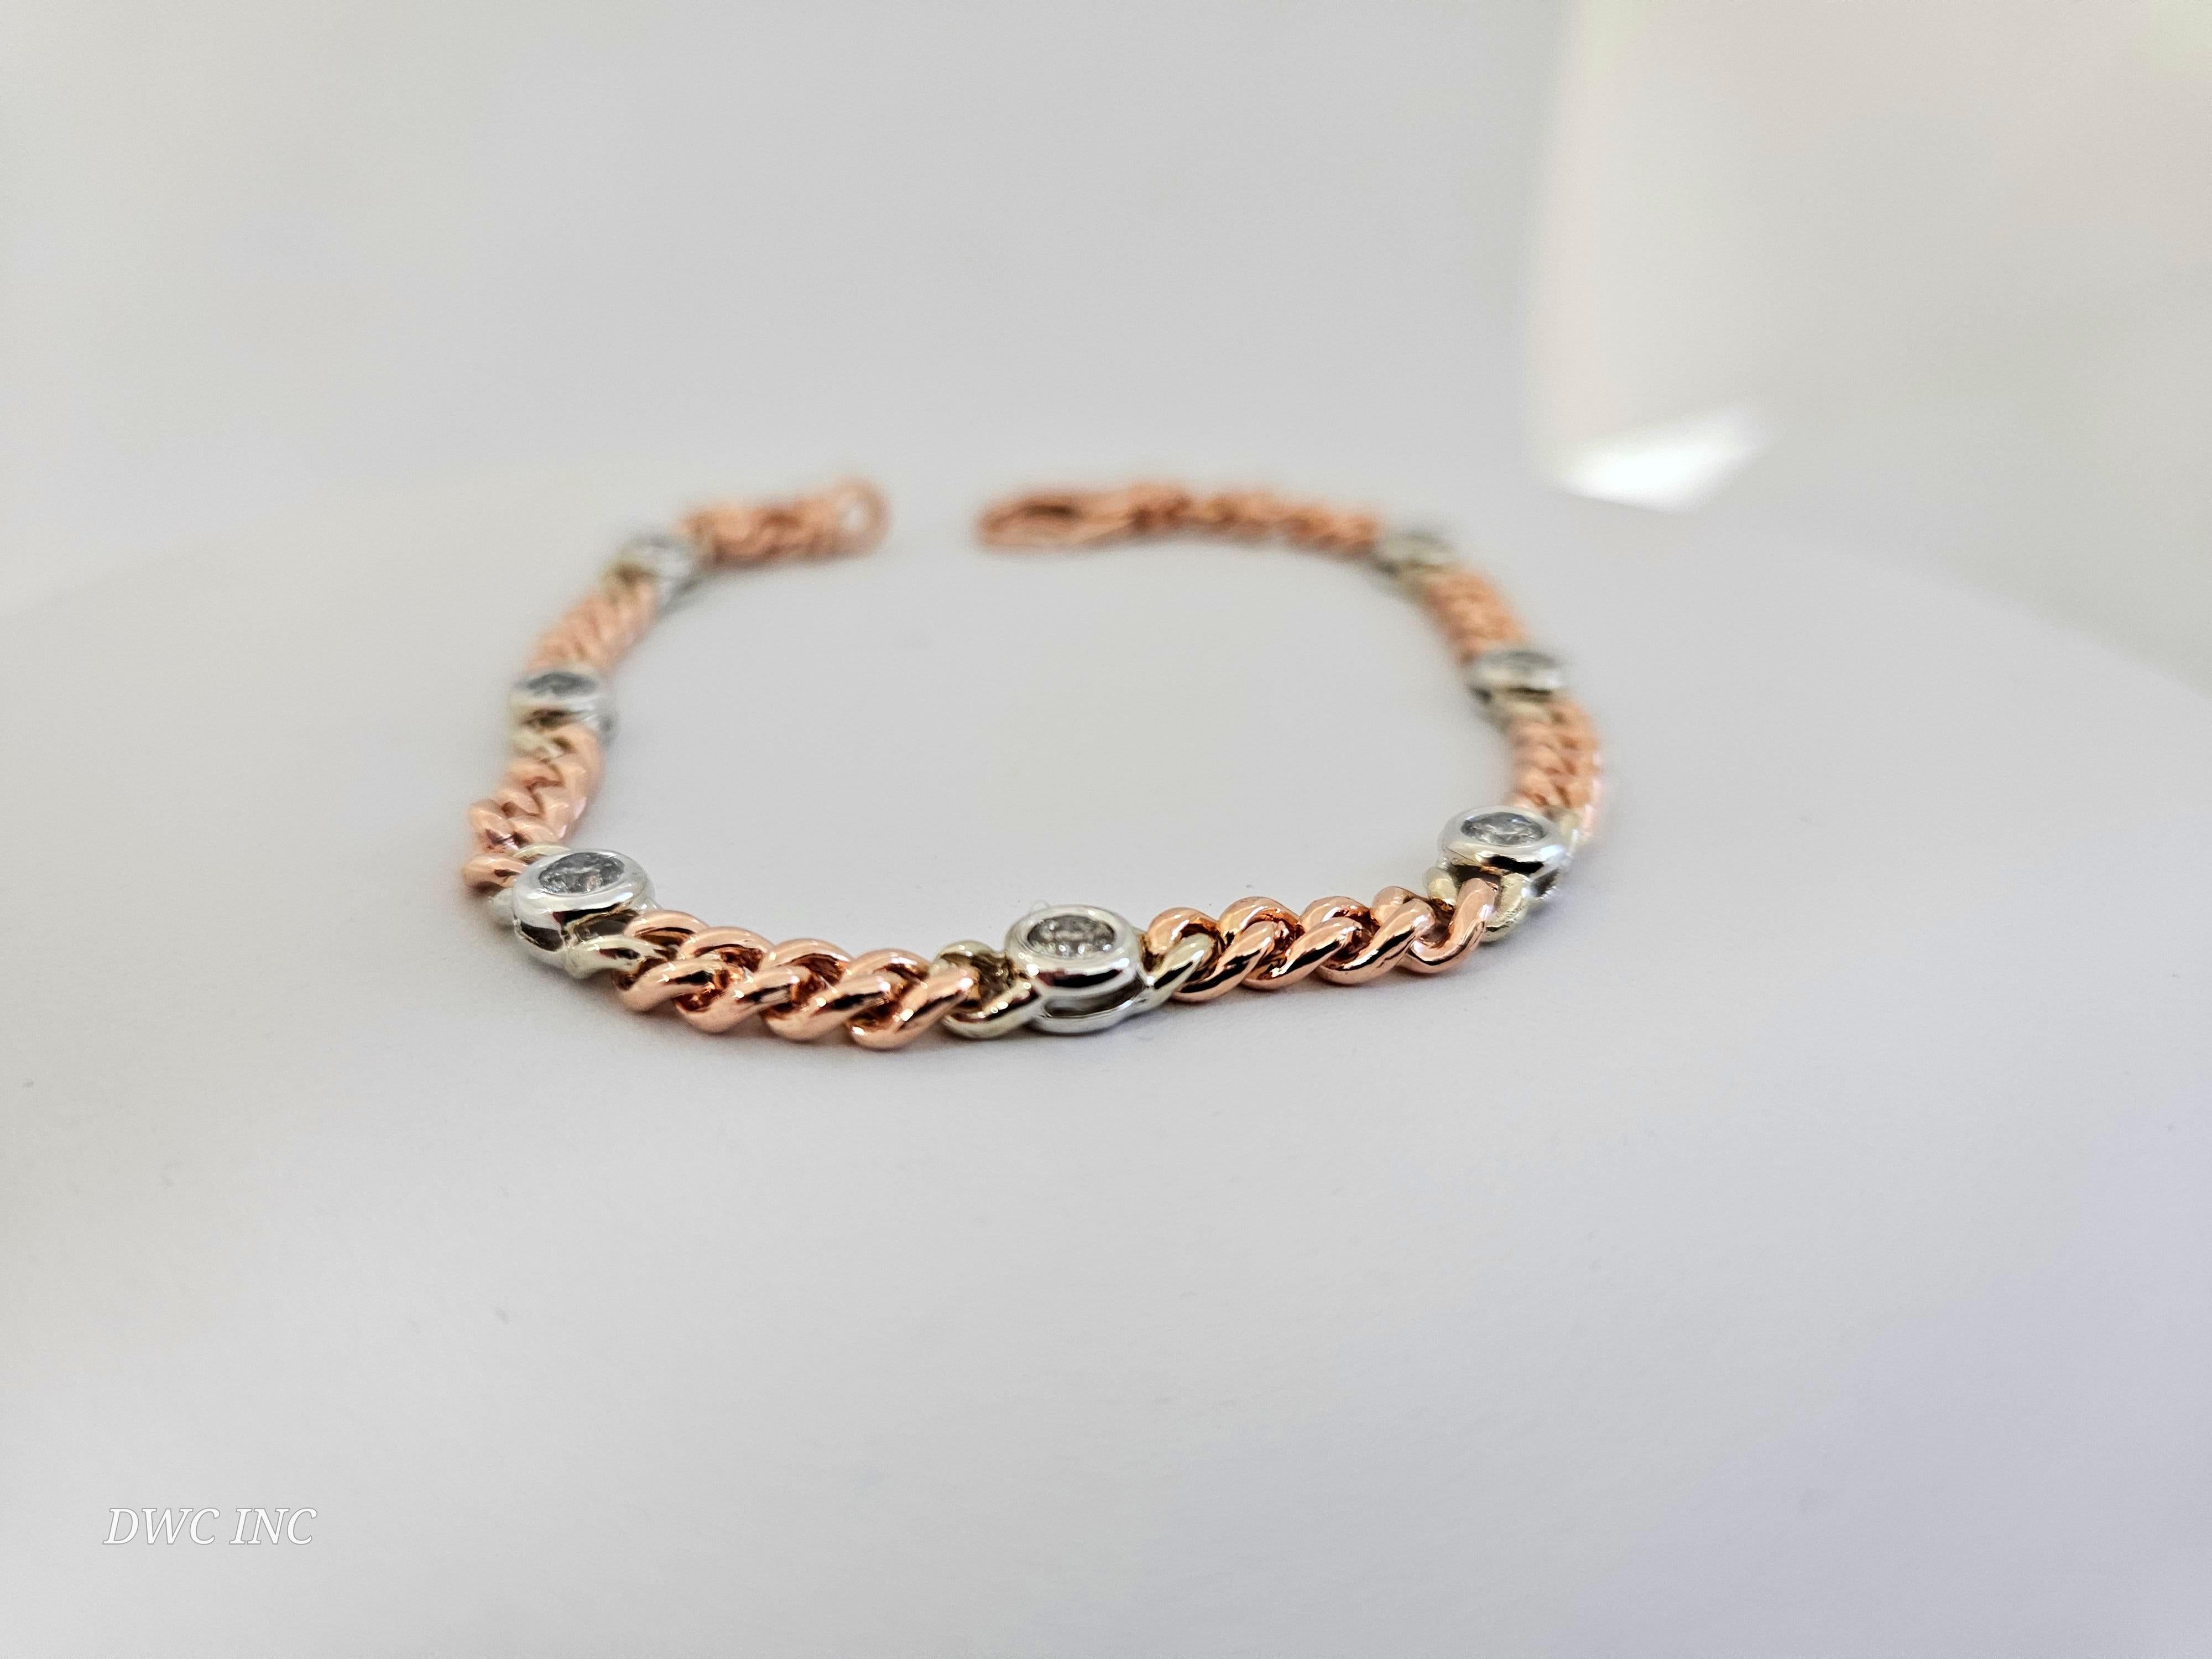 1.04 ctw Natural Diamond Cuban Bracelet Rose Gold 14K 7 inch
Natural Round Diamonds, Very shiny, secure box togue clasp.
Average color G-I, 7pcs  5 mm width. 12.16 grams.

*Free shipping within the U.S.*